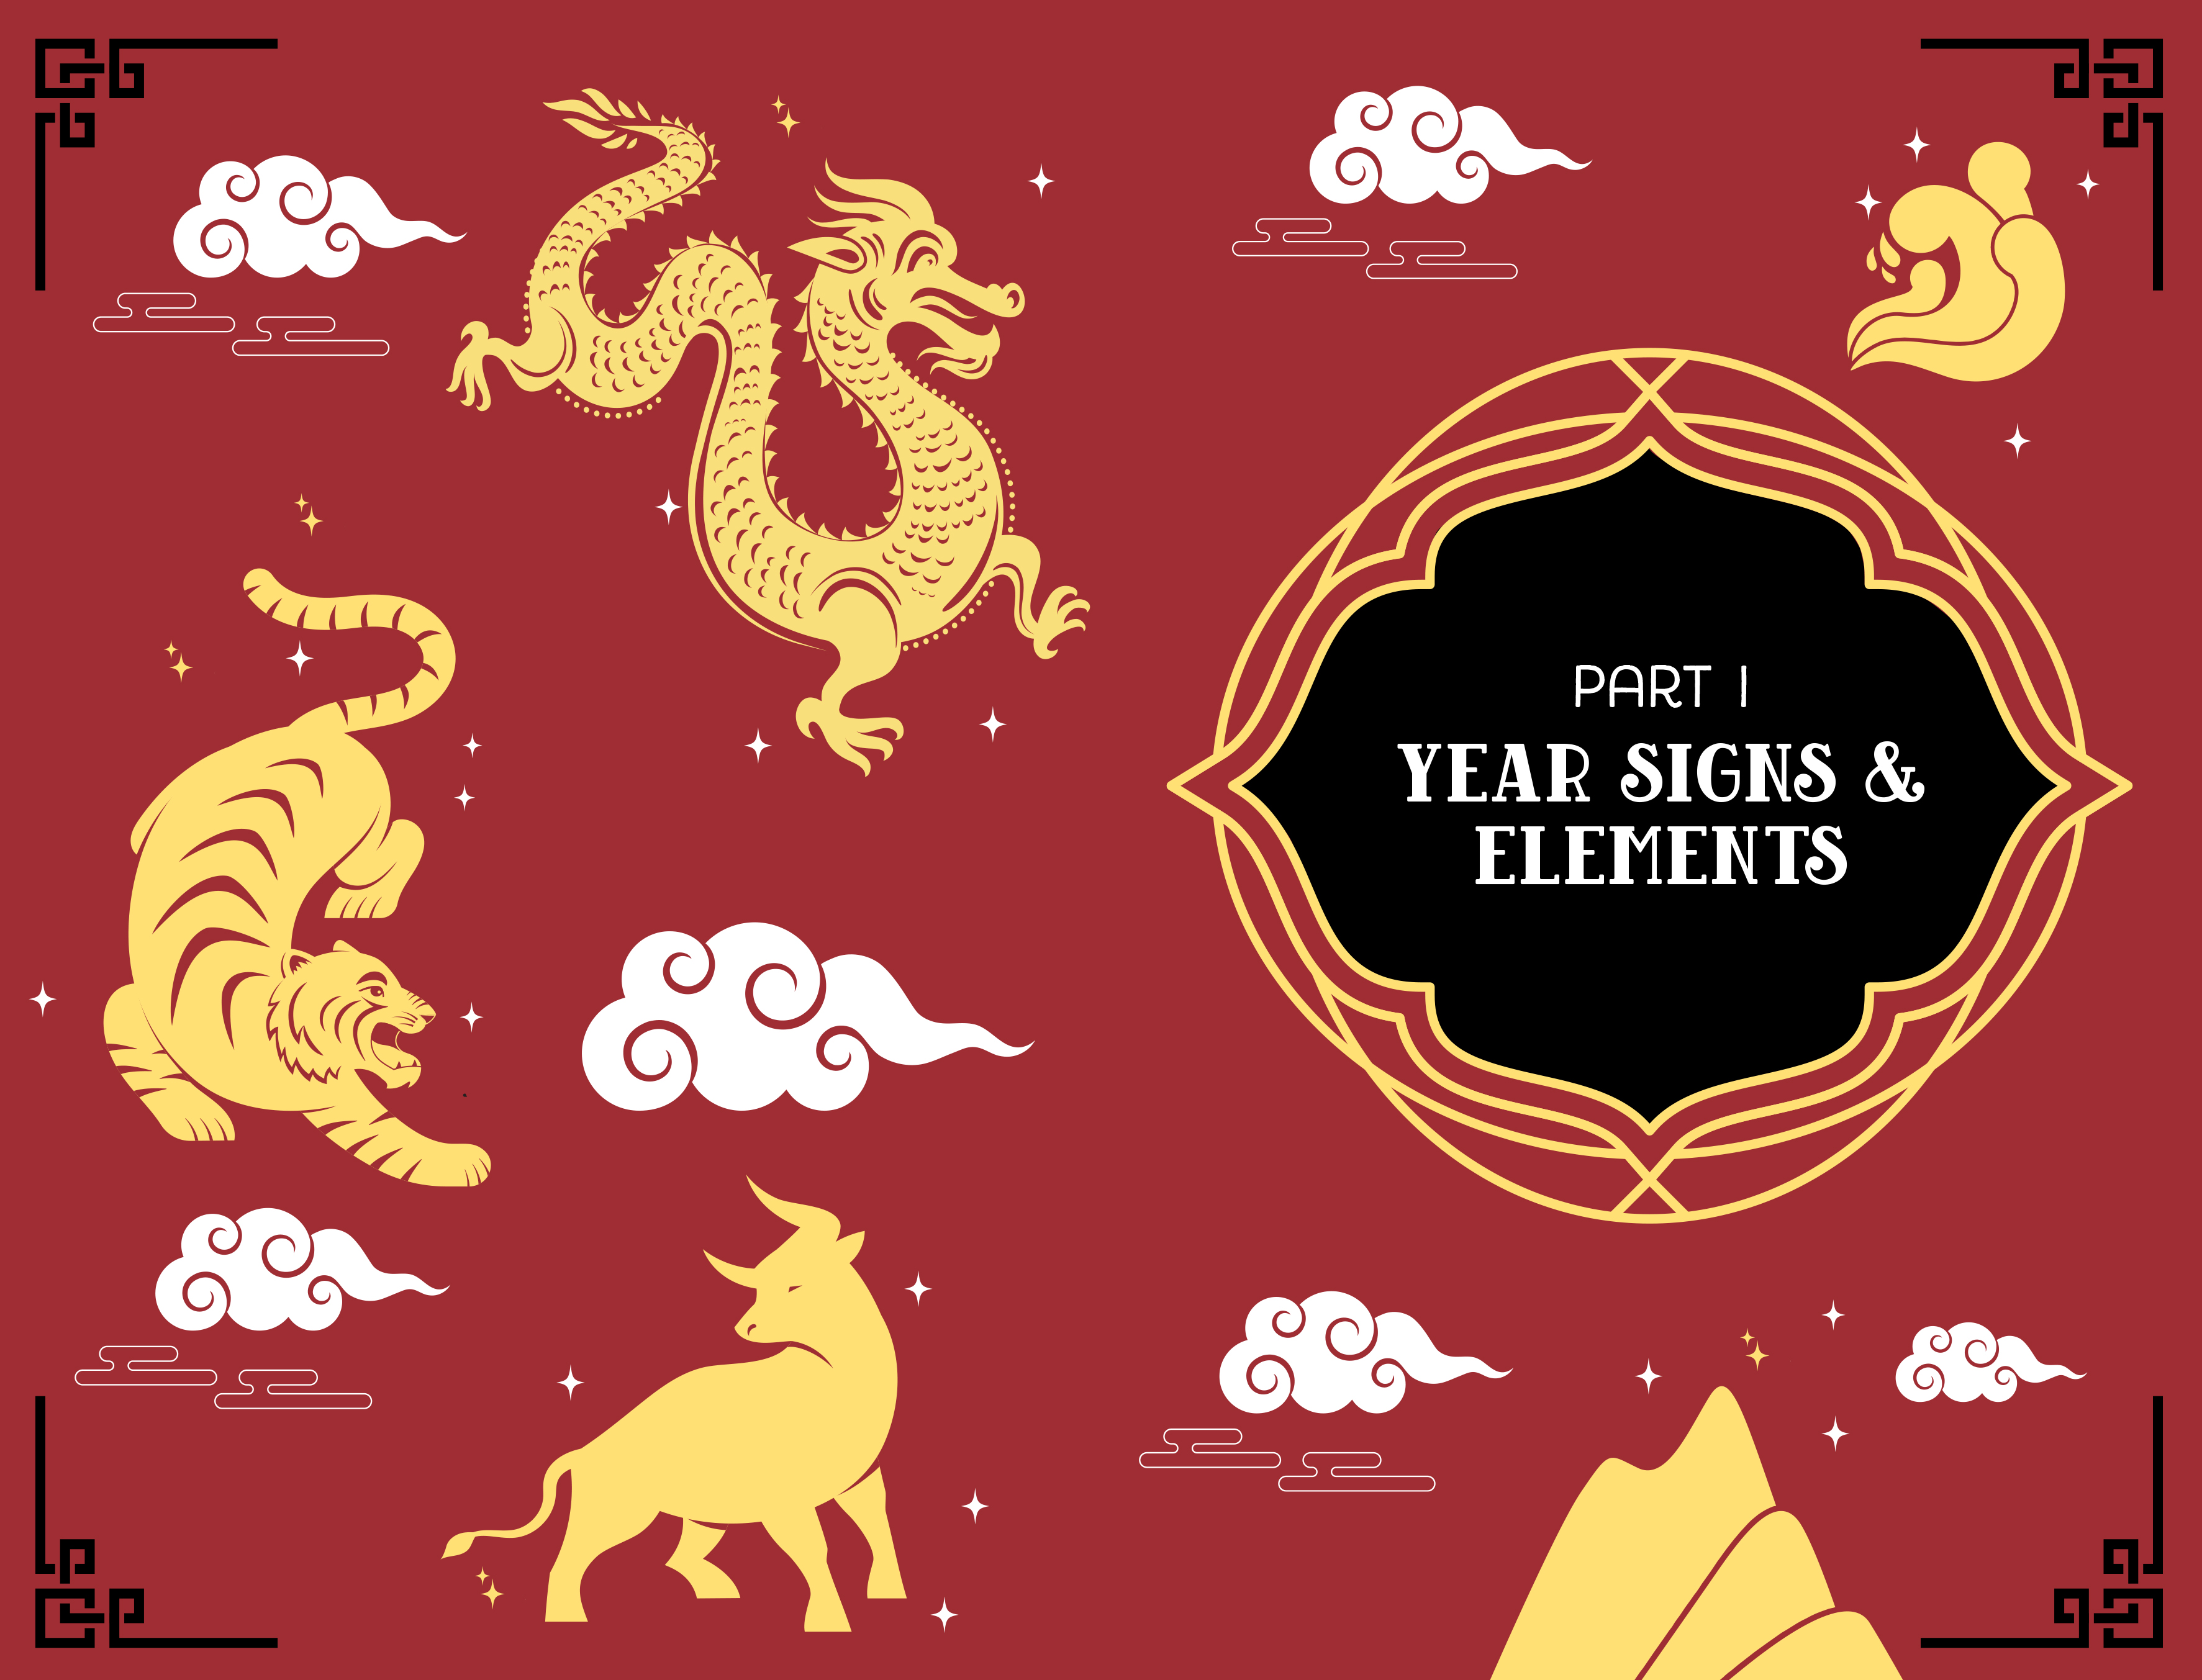 In Focus Chinese Astrology